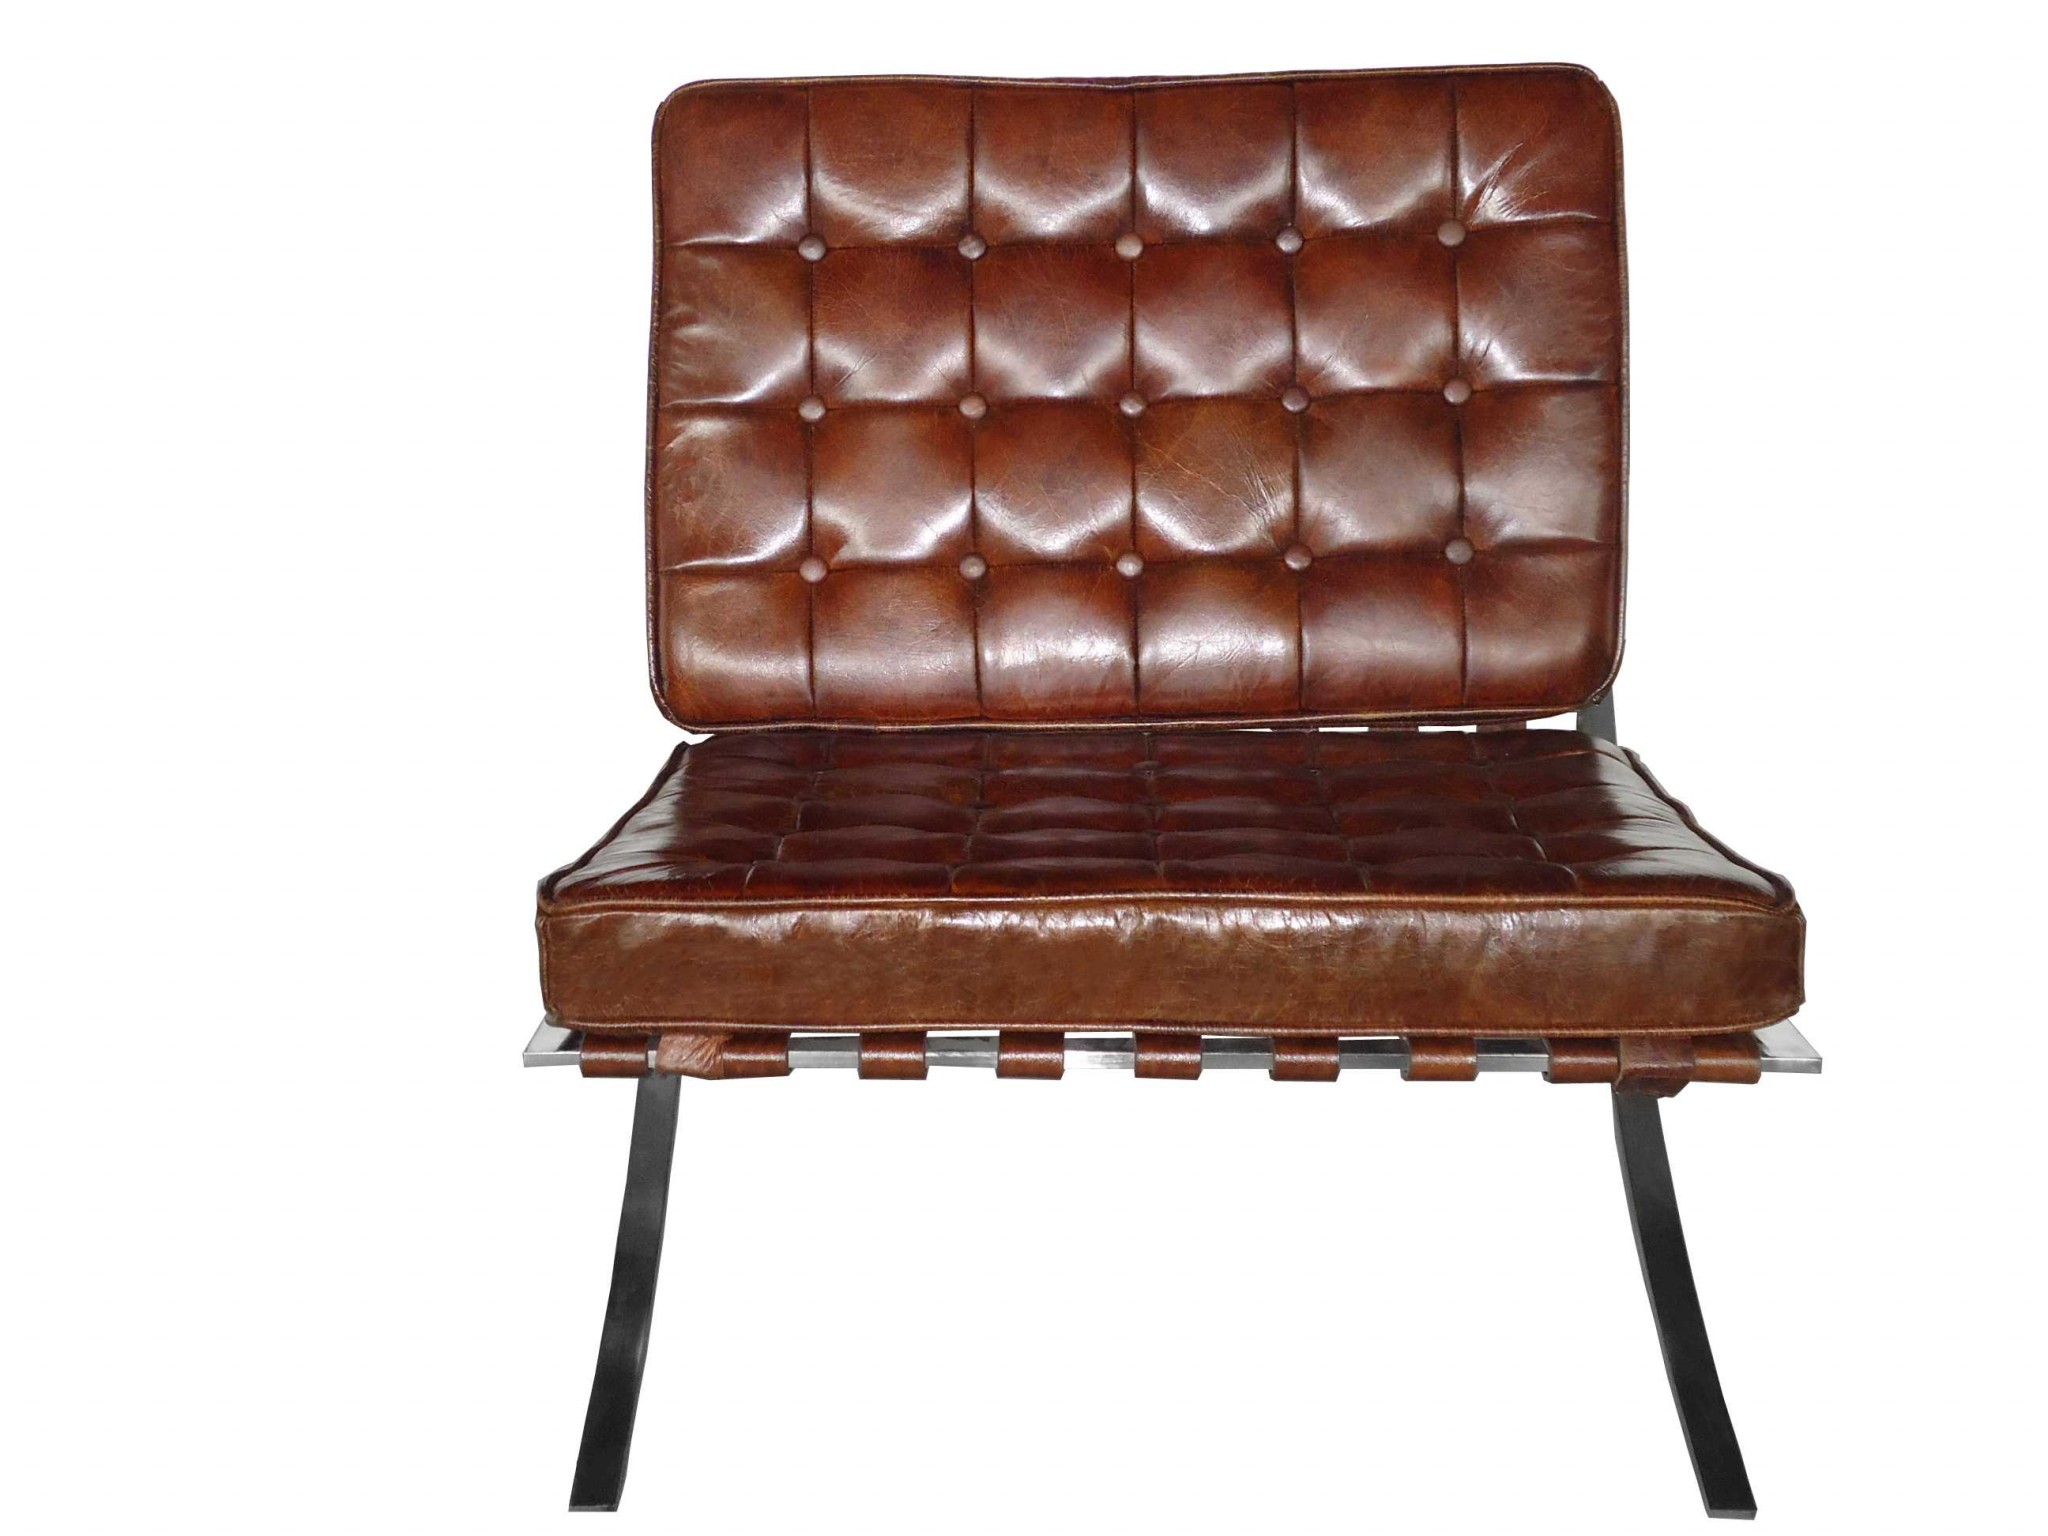 32" X 30" X 35" Brown Full Leather Fireproof Foam Chair